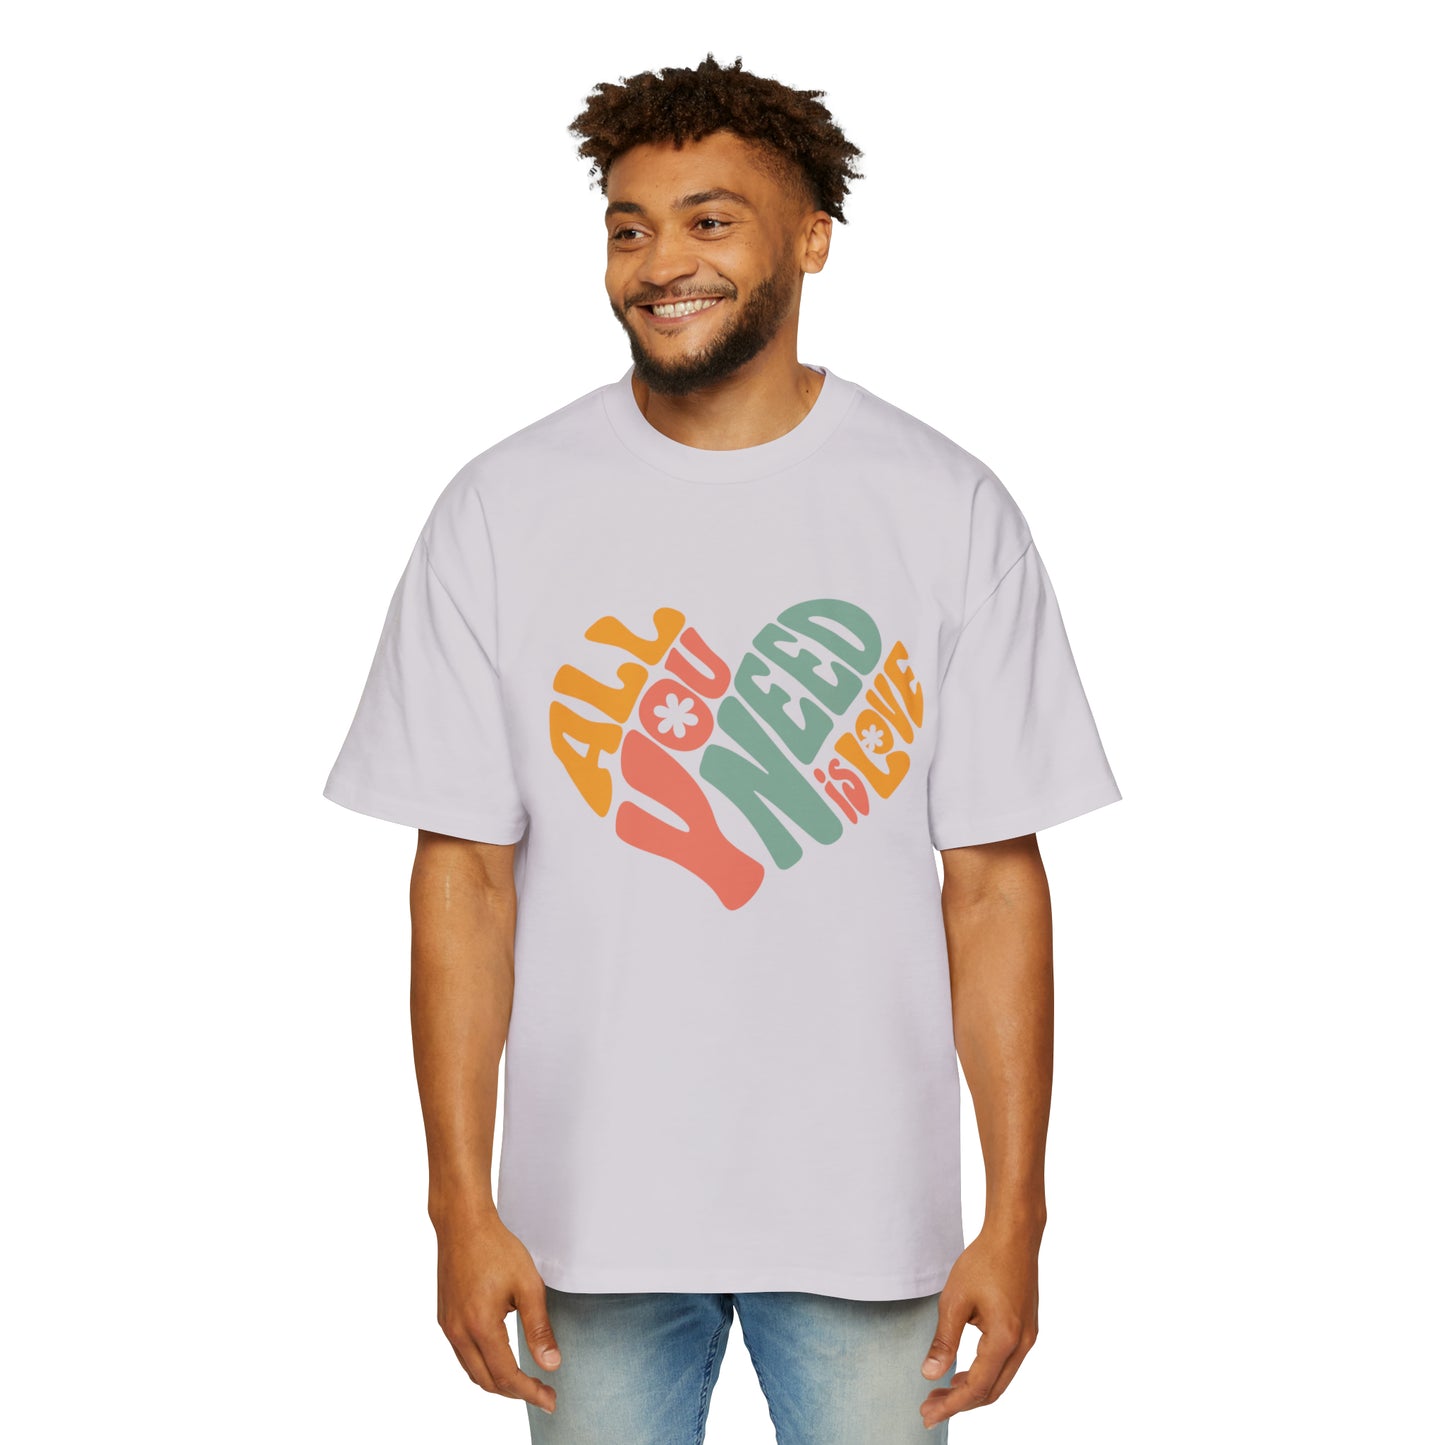 All You Need is Love Heavy Oversized Tee great gift for him or her. Great gift for Valentines Day, Birthdays or just because.